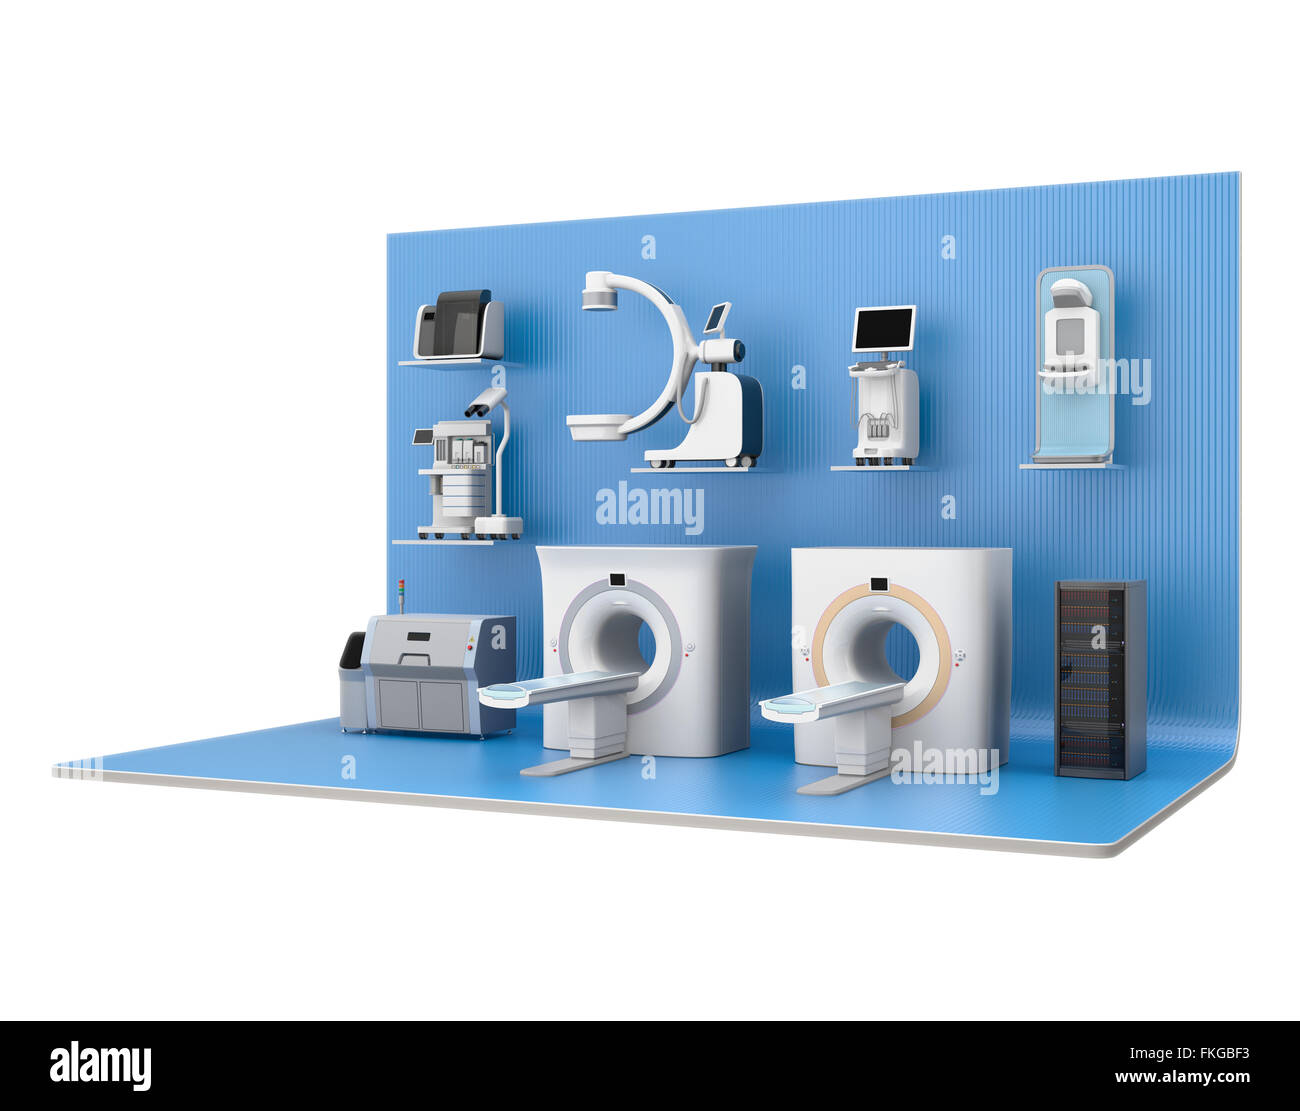 Medical imaging system on blue exhibition stage. Concept for medical digital work flow solution Stock Photo